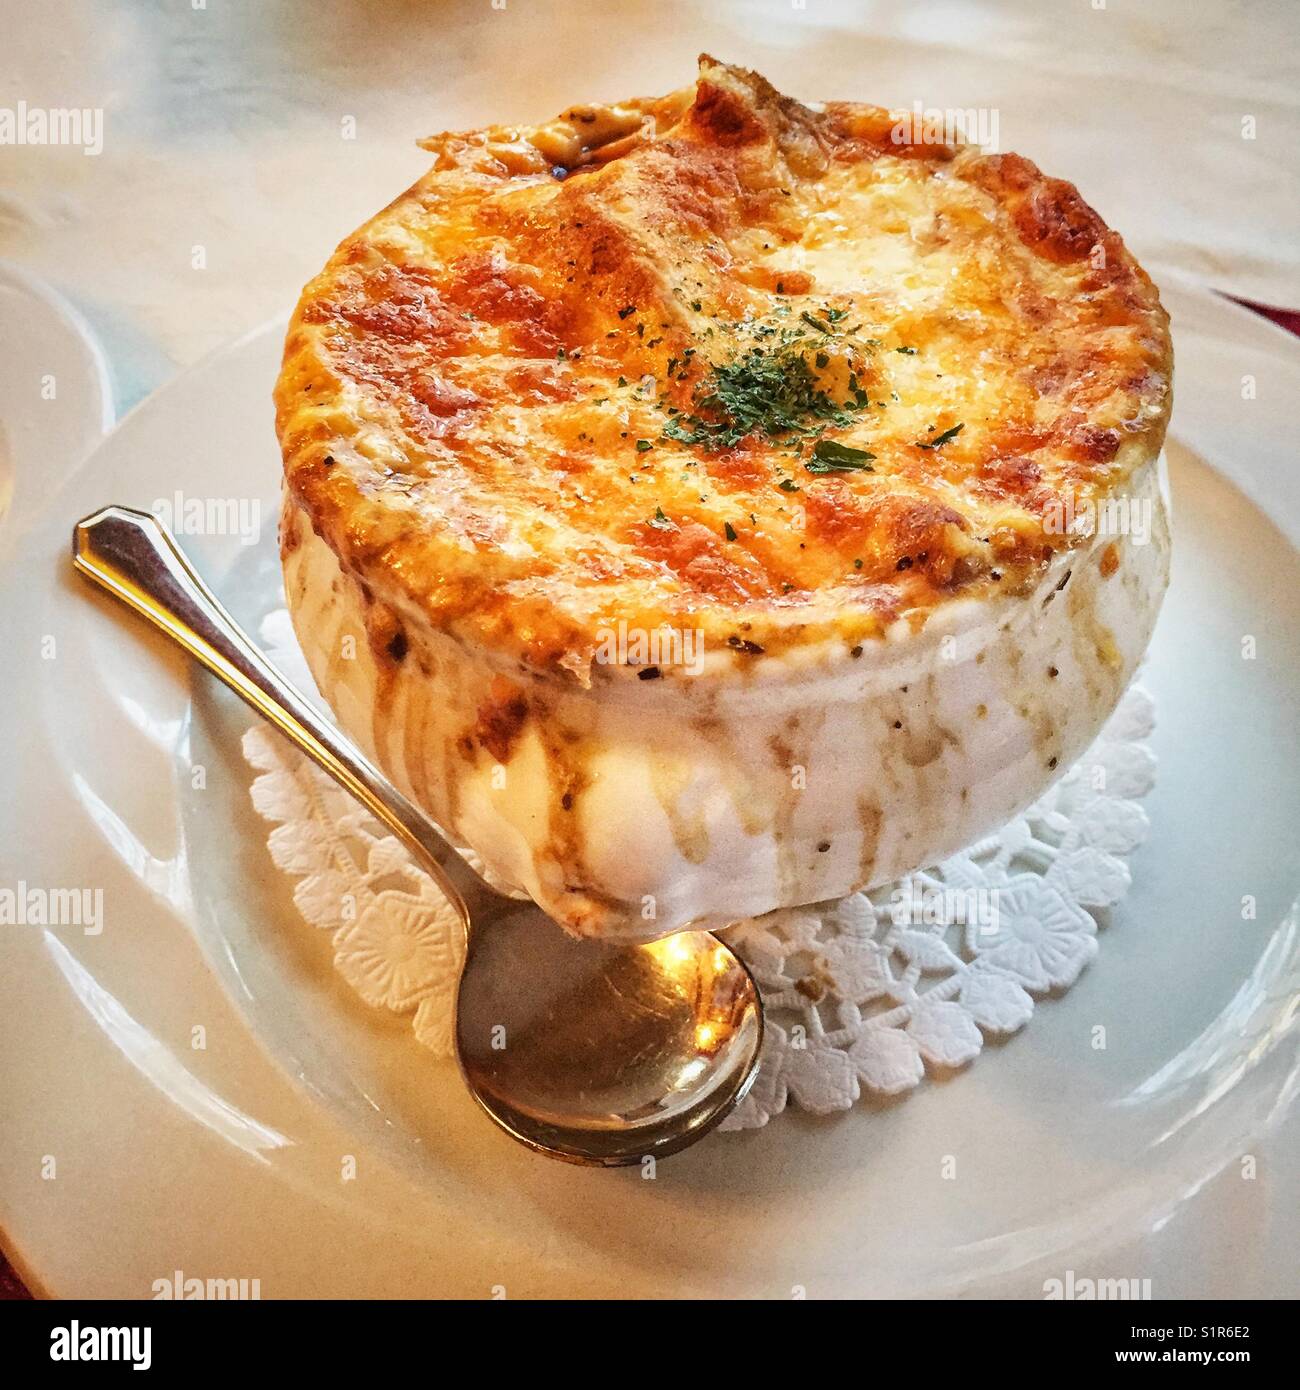 Chicago Bistro French Onion Soup